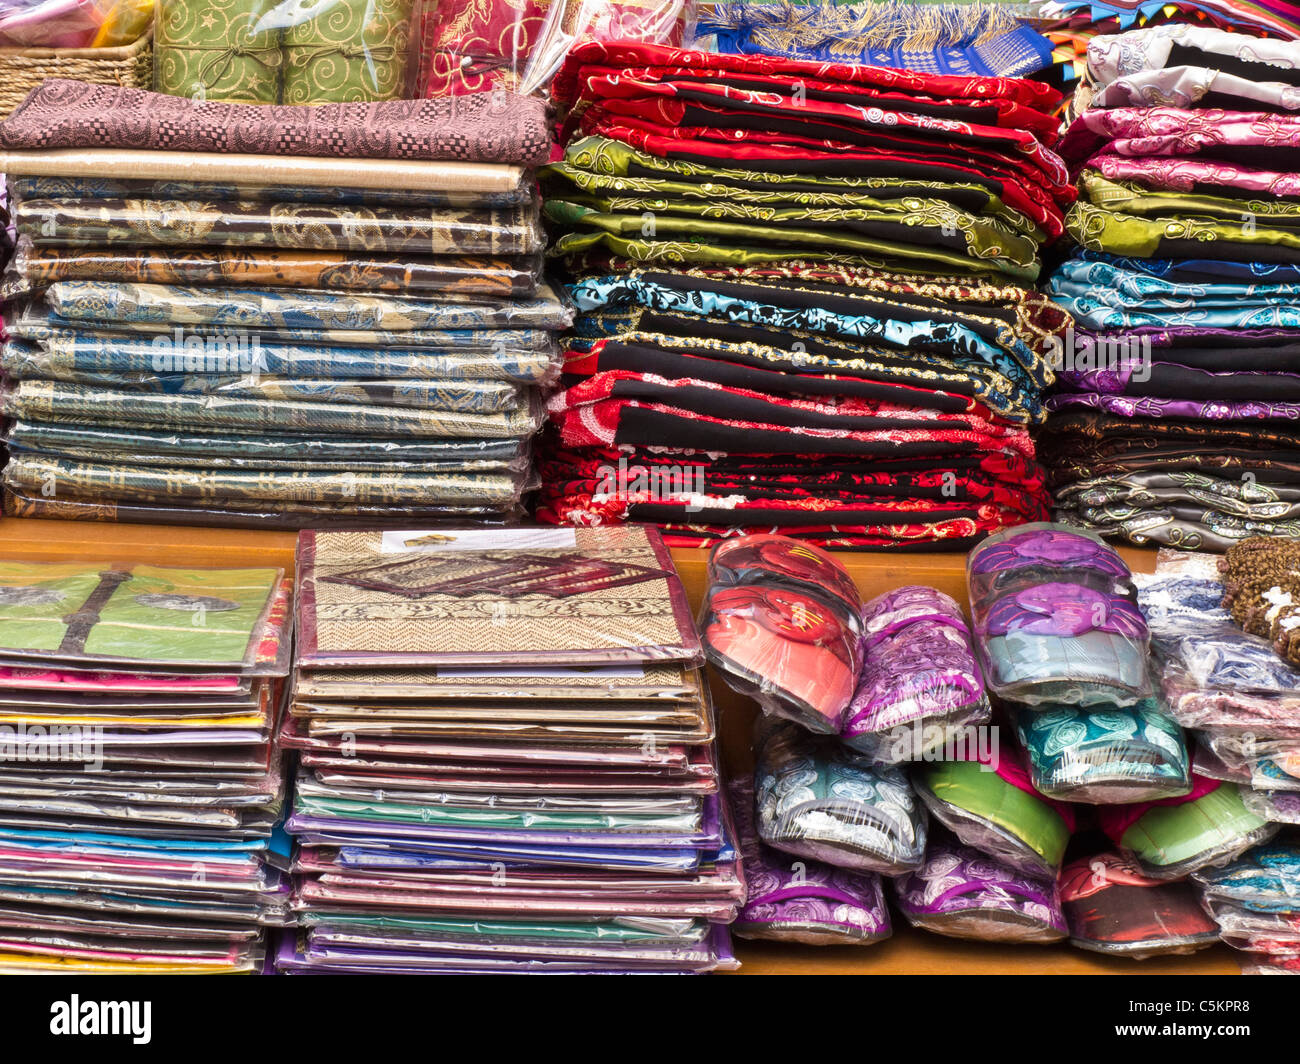 Silk cloth and slippers for sale in market stall Stock Photo